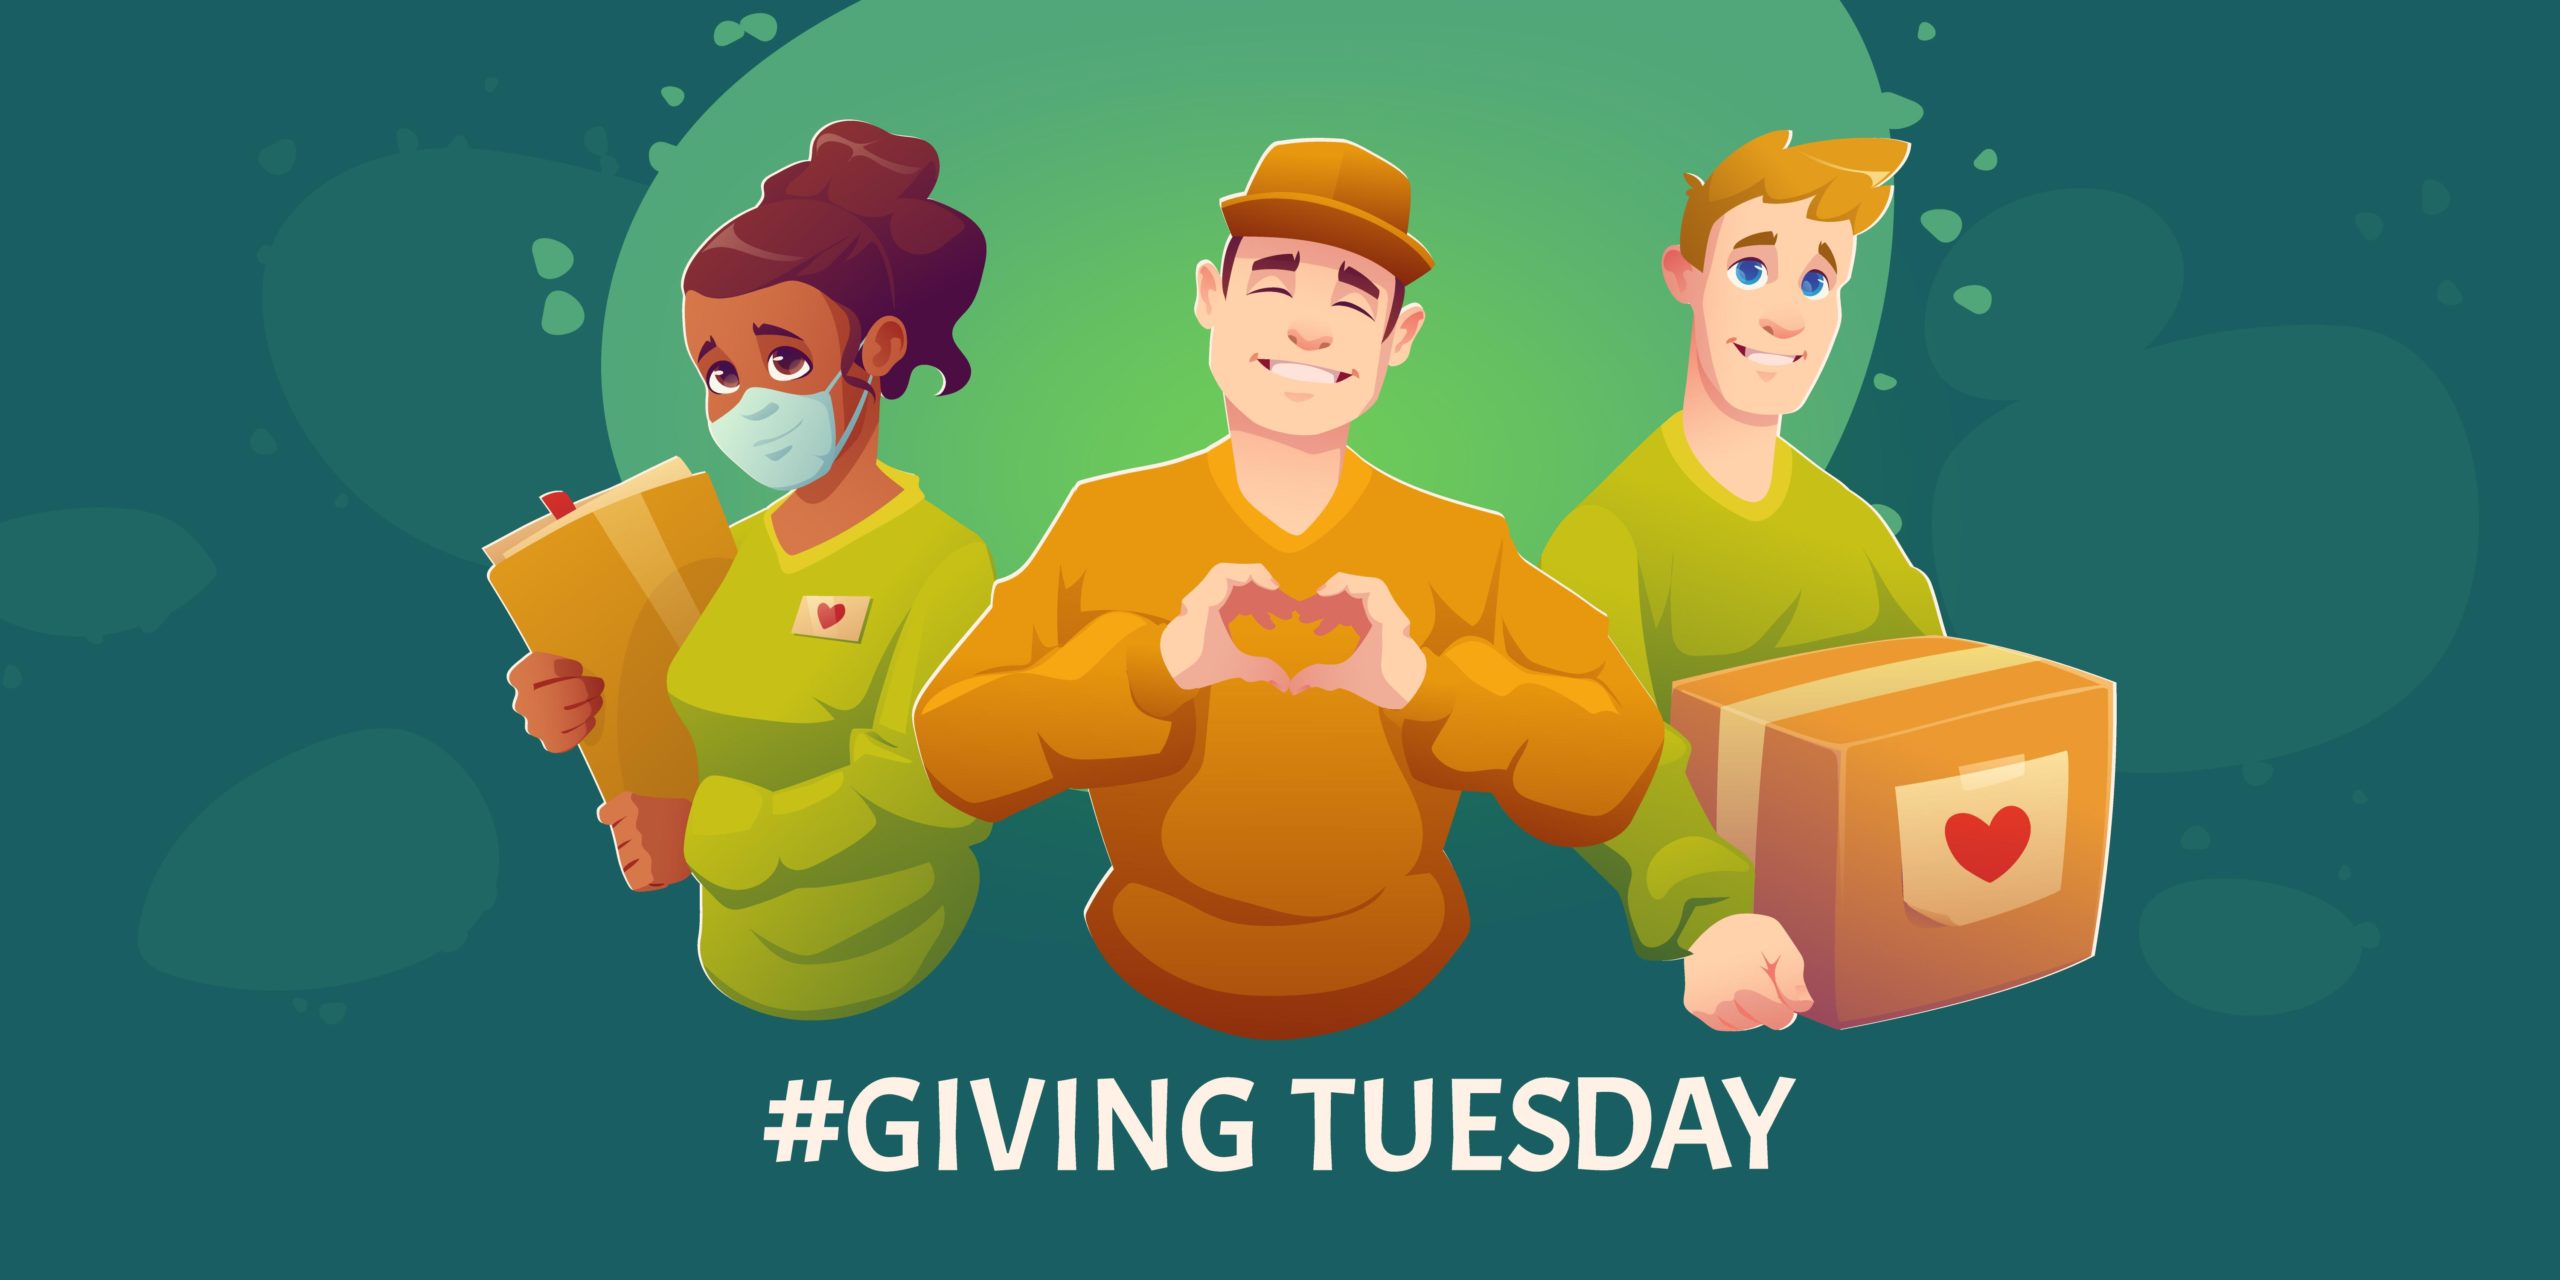 Giving Tuesday 2022: Best Quotes, HD Images, Messages, Greetings, Sayings, Wishes, Posters, Banners, and Instagram Captions